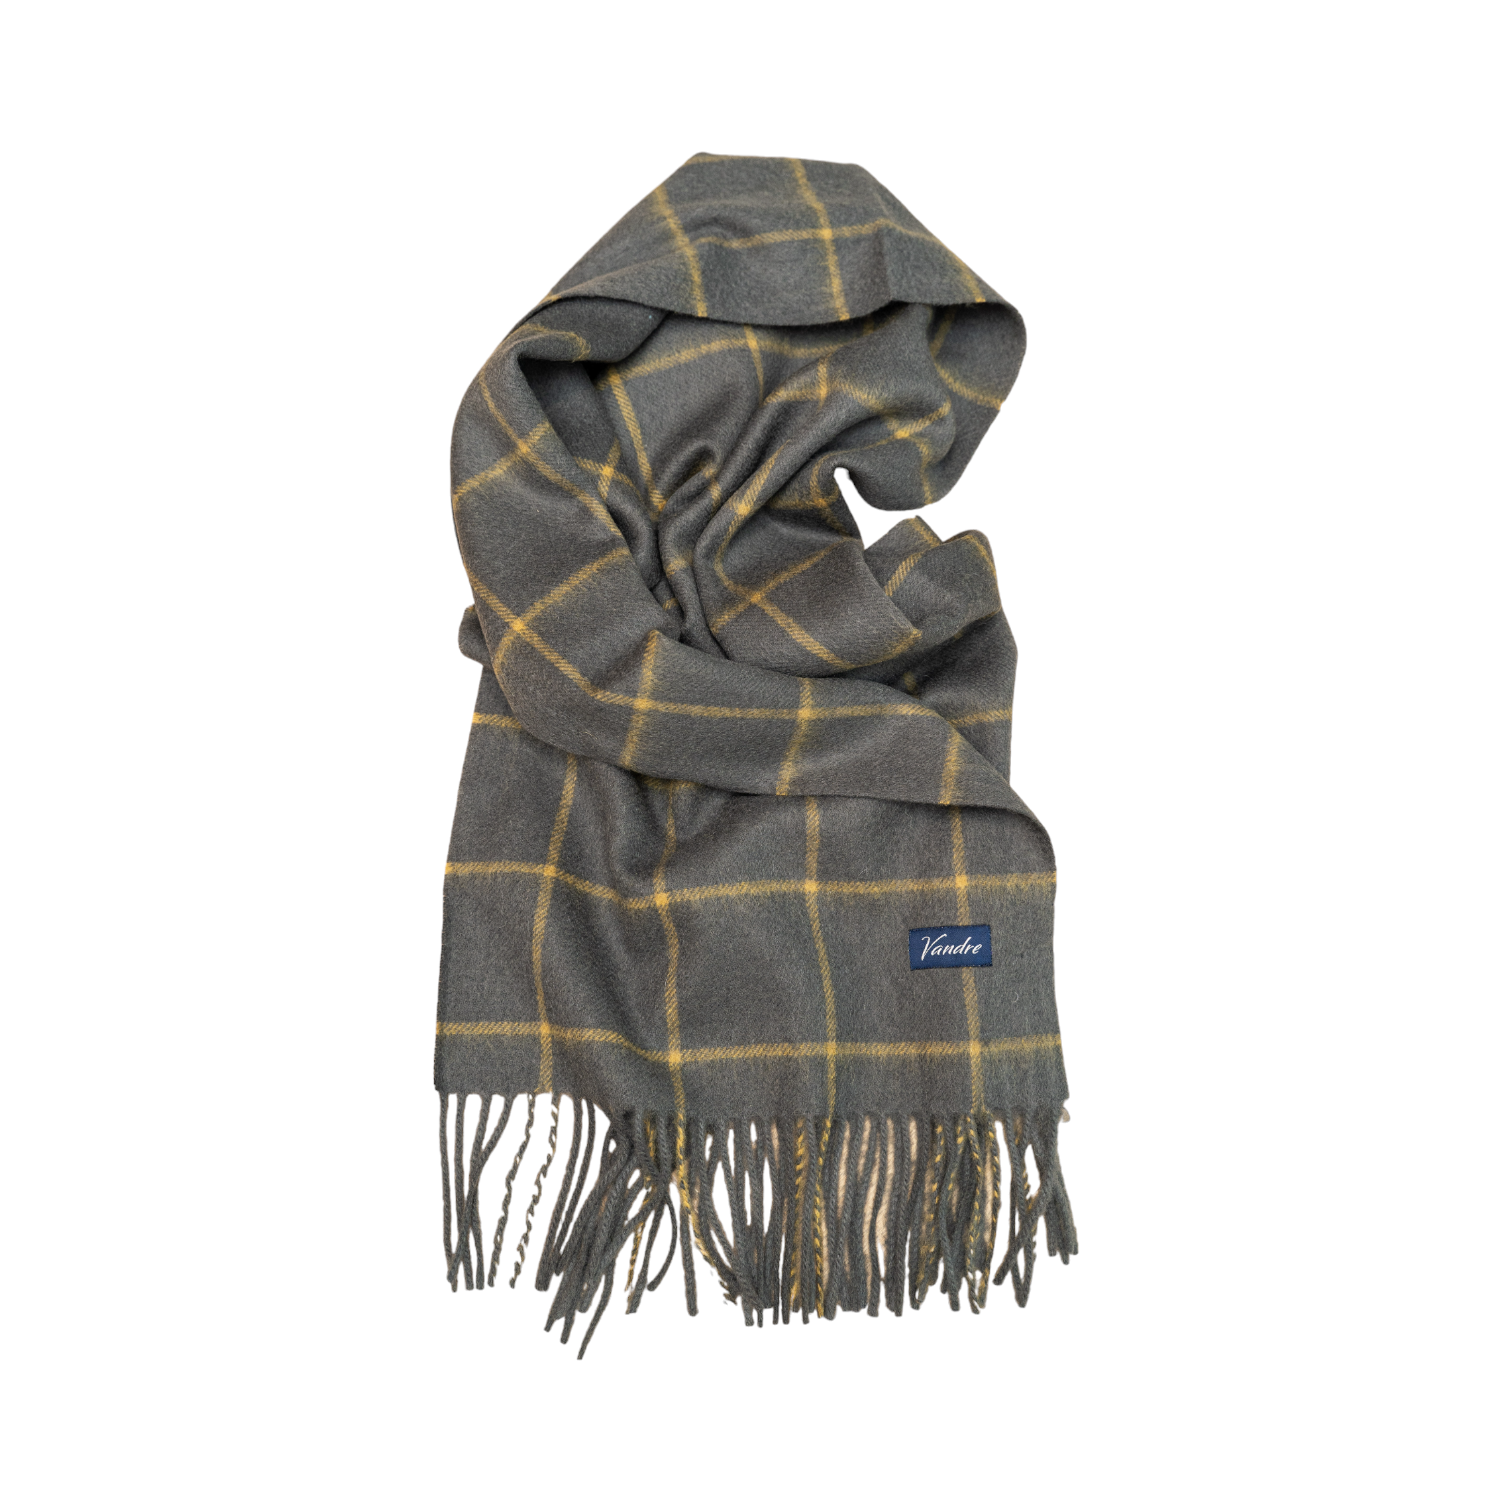 100% wool scarf with fringe detail - Gray